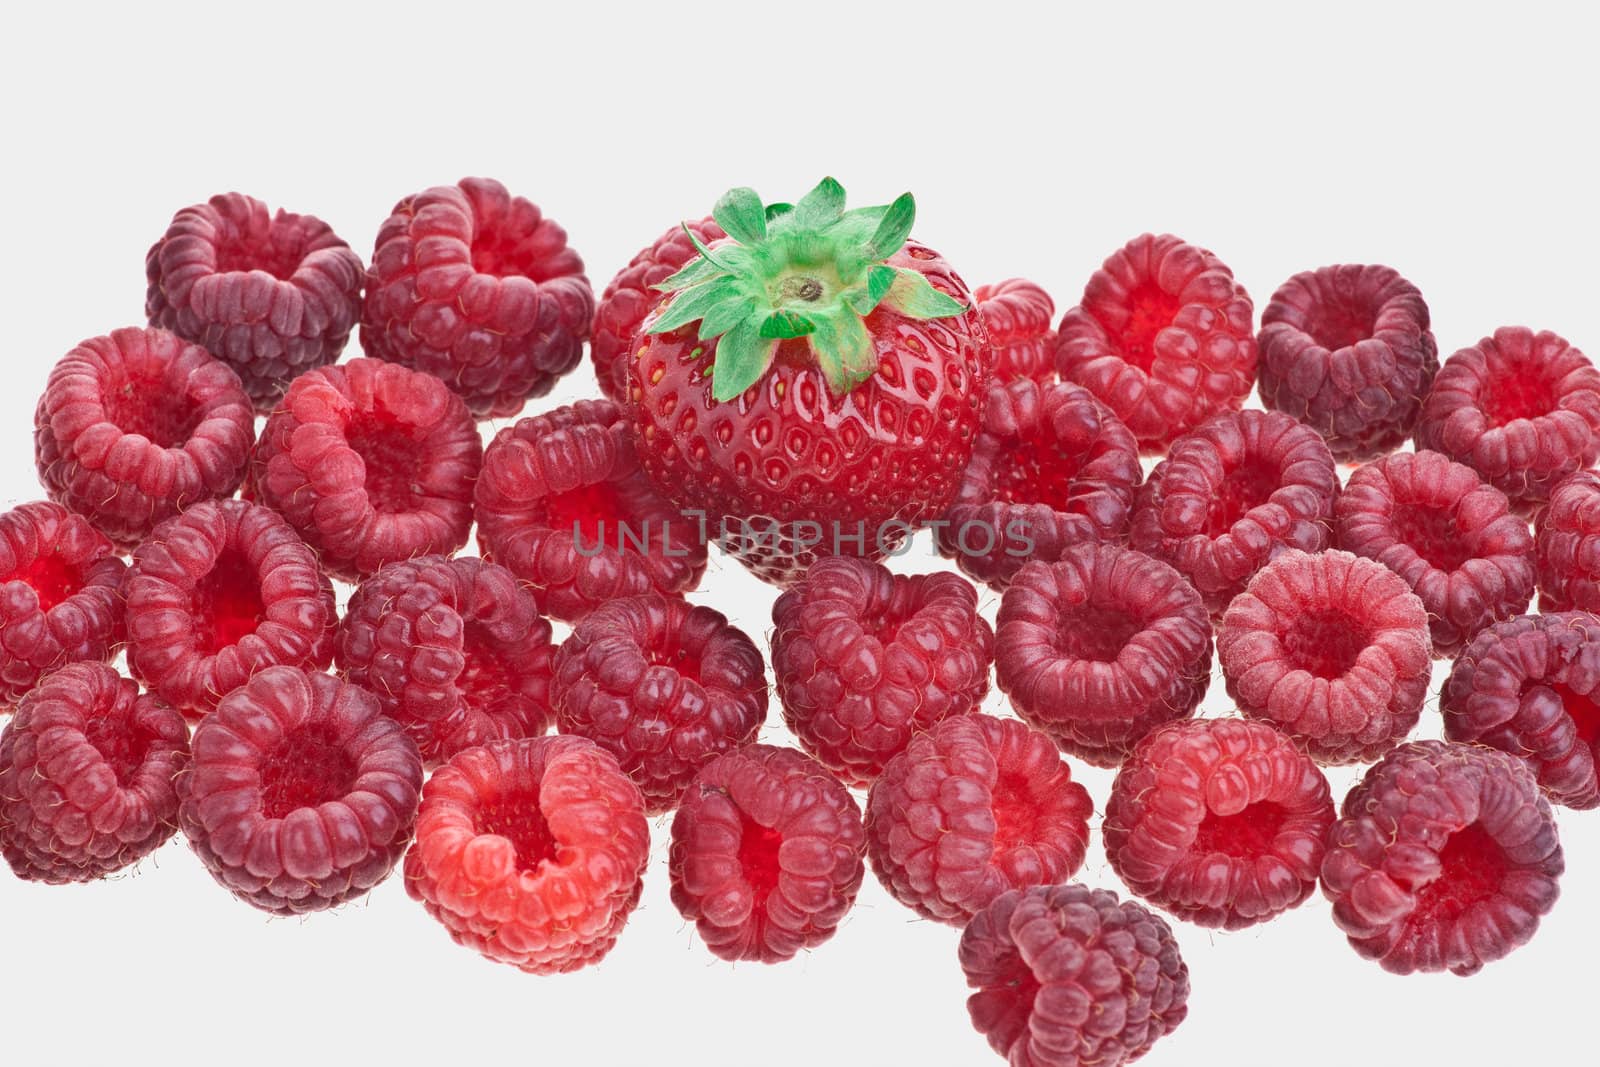 Strawberry and rasberries by Marcus